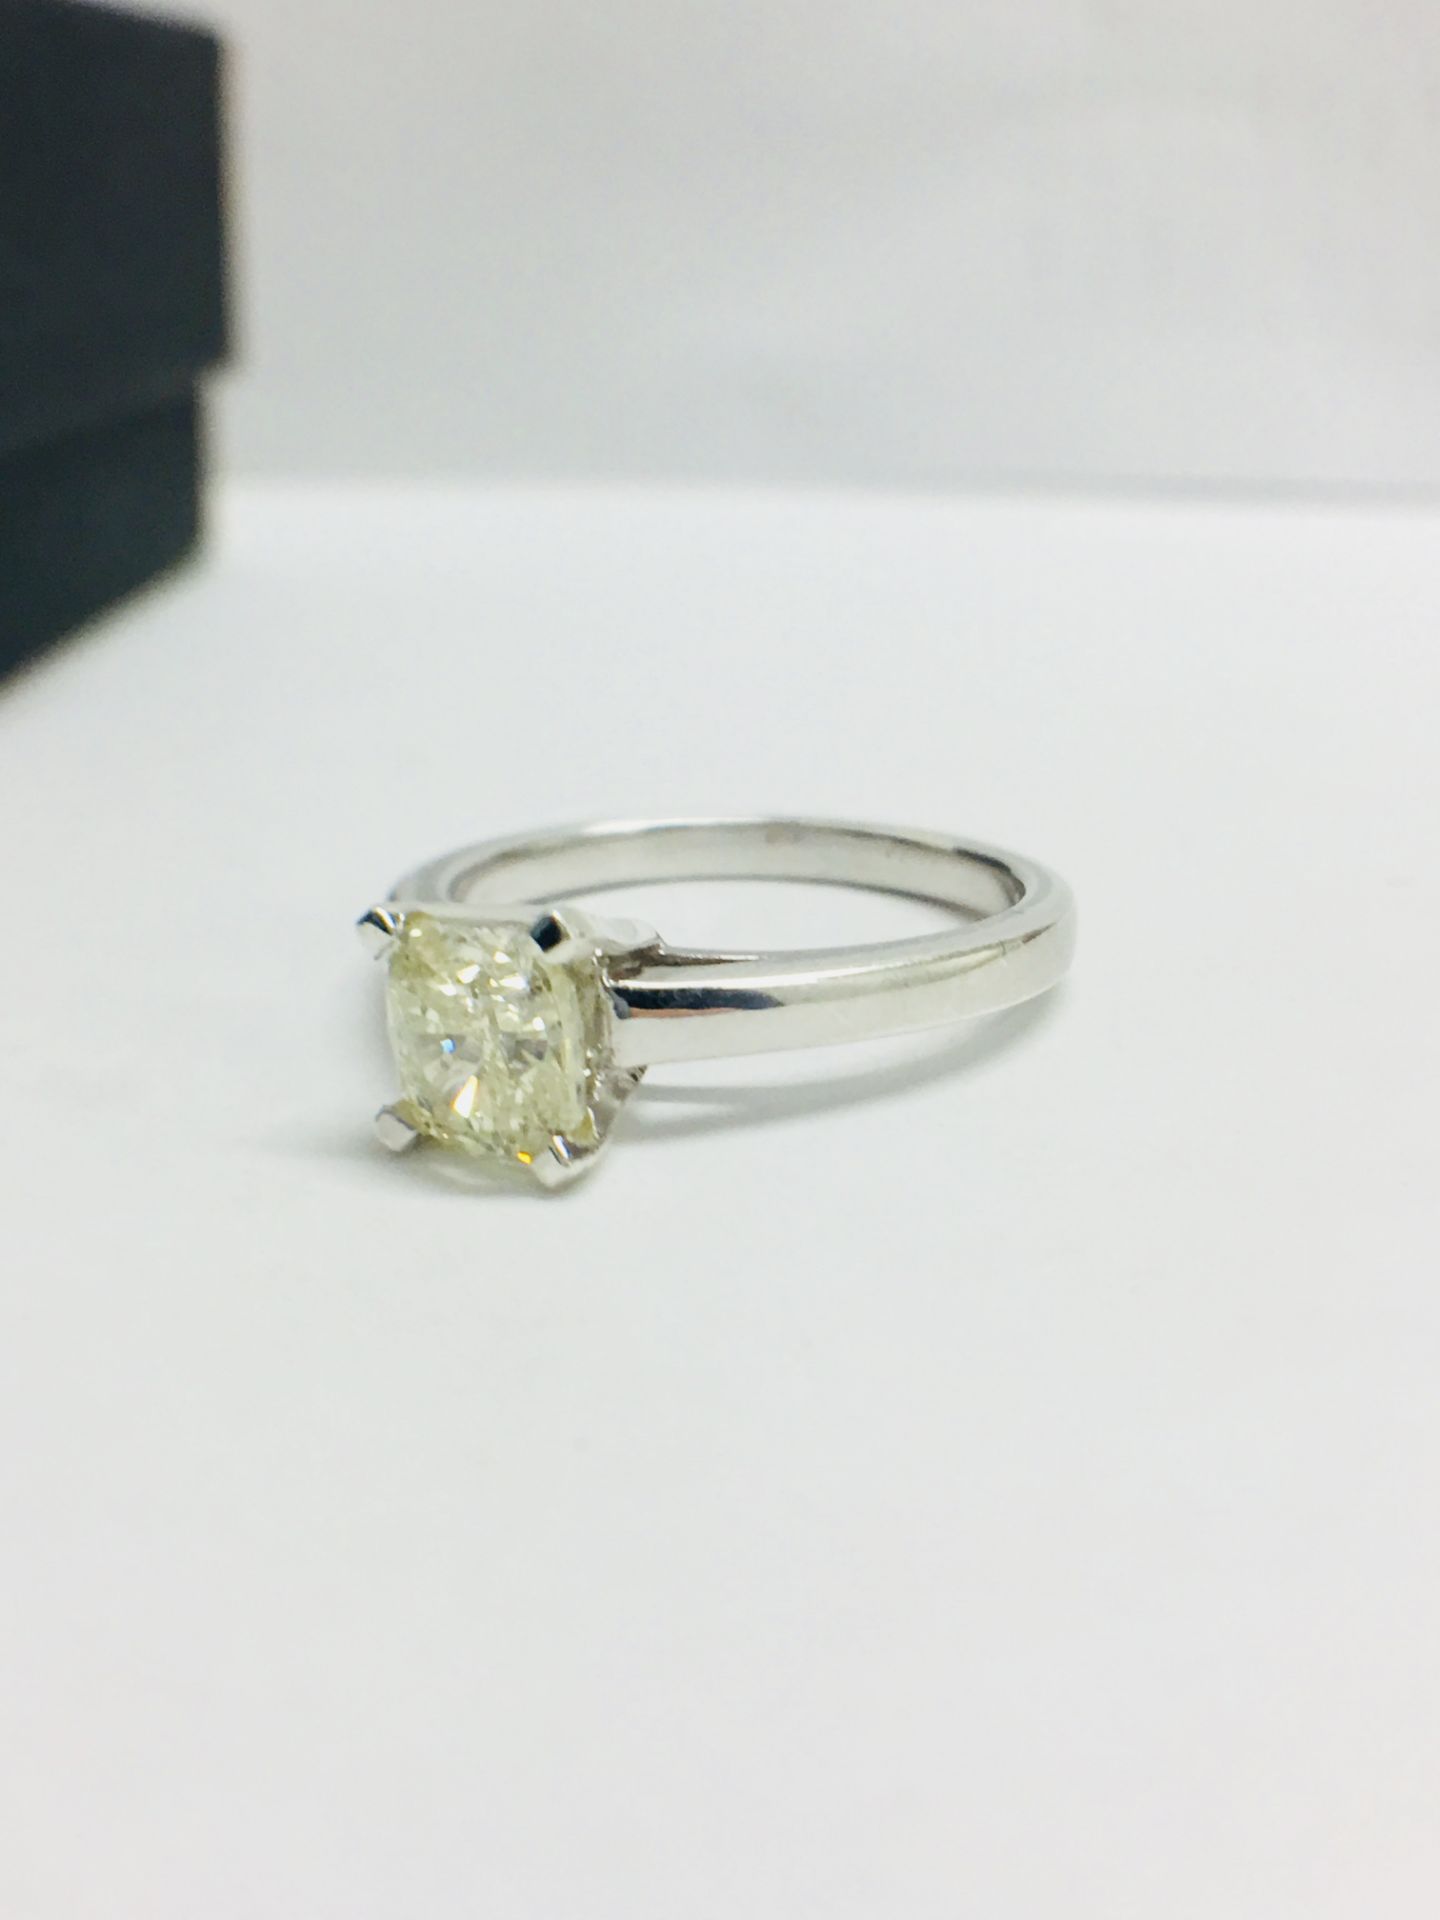 1.00ct diamond solitaire ring with a Cushion cut diamond. J colour and I1 clarity enhanced stone. - Image 2 of 7